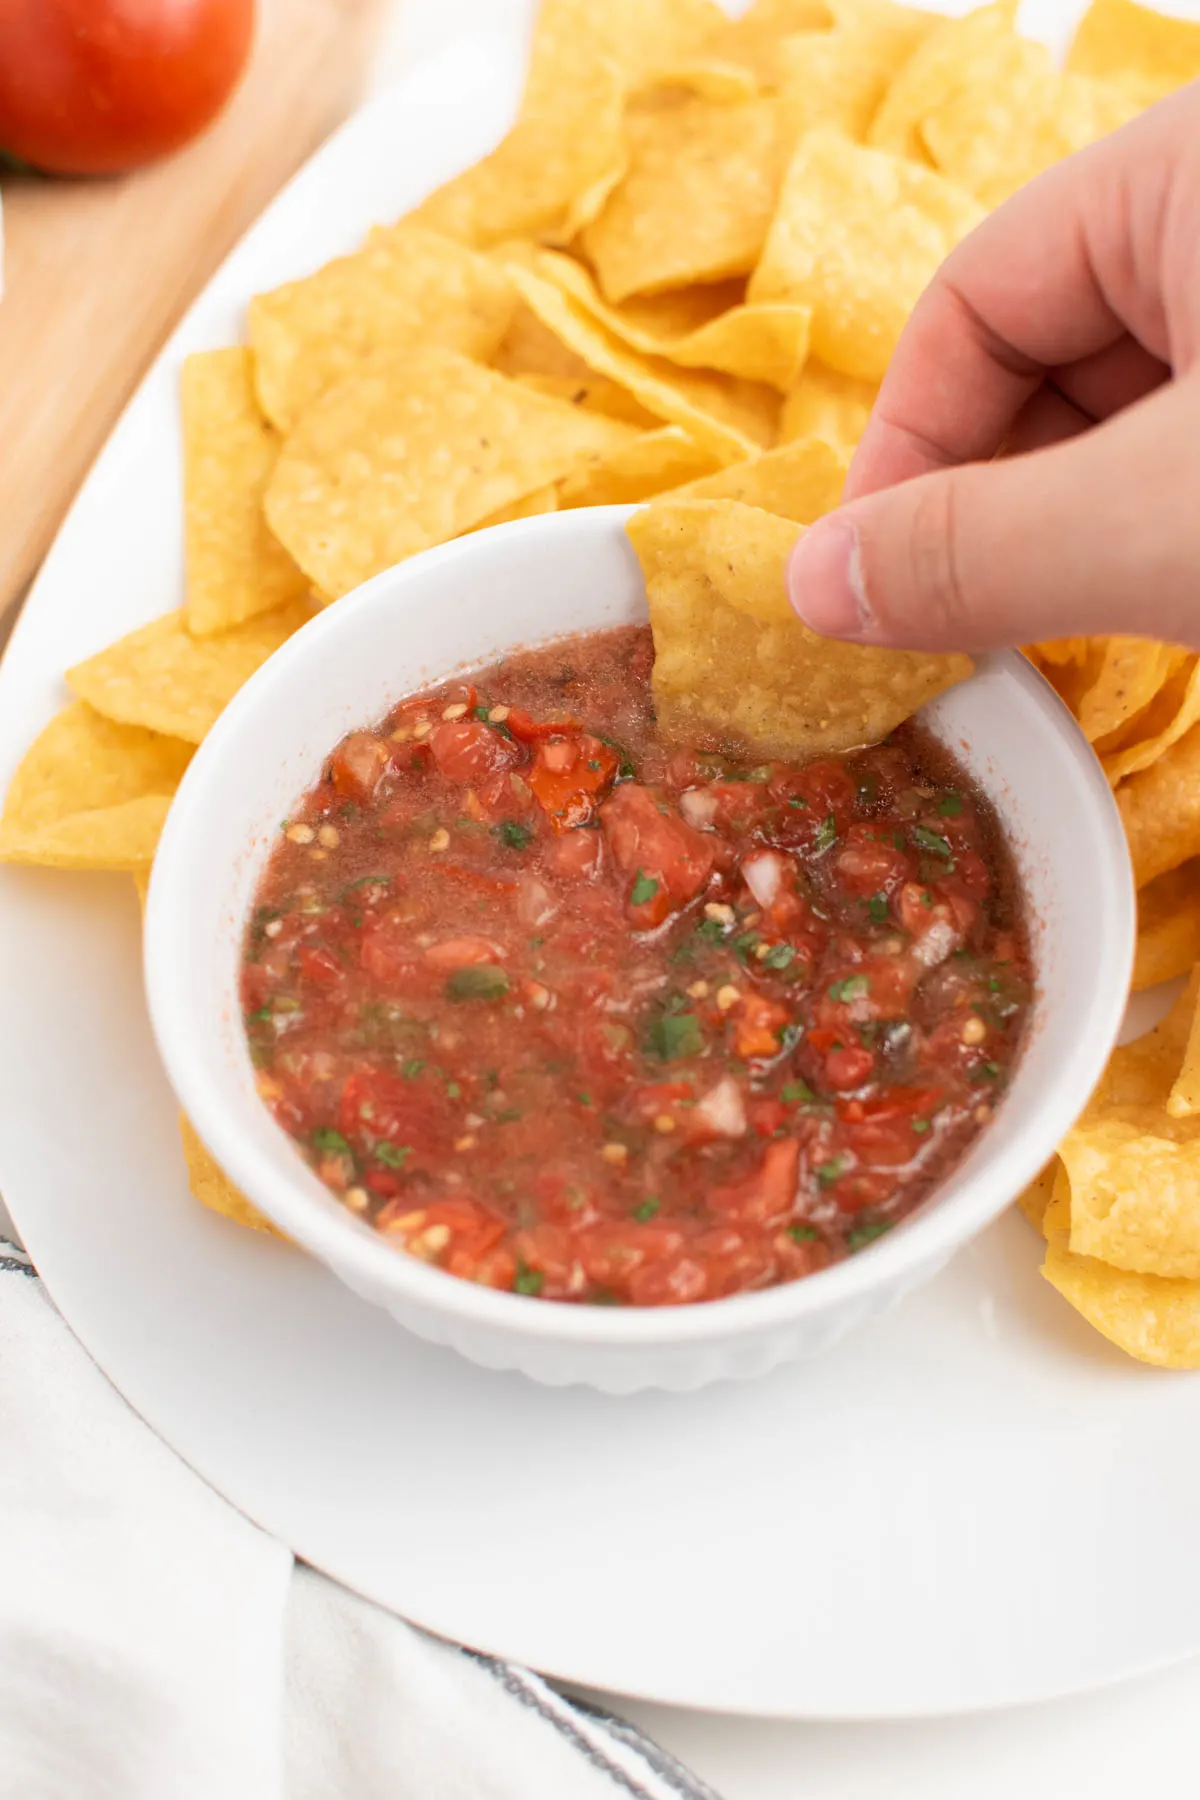 Man dips tortilla chip into garden salsa with tomatoes and cilantro.